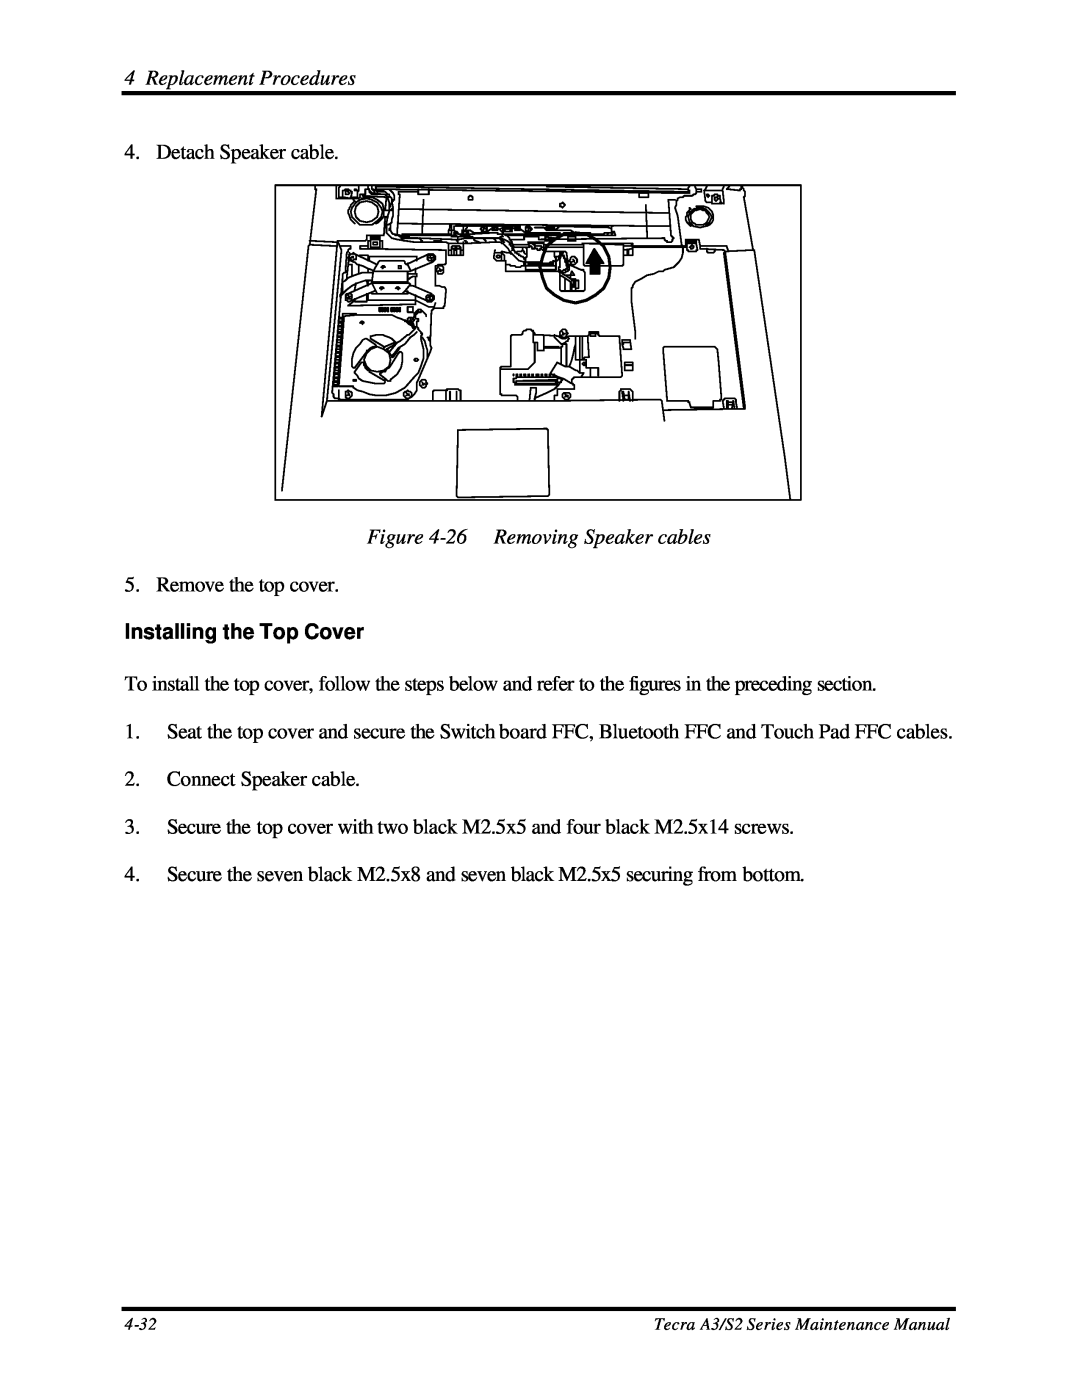 Toshiba S2 manual 26 Removing Speaker cables, Installing the Top Cover, Replacement Procedures 